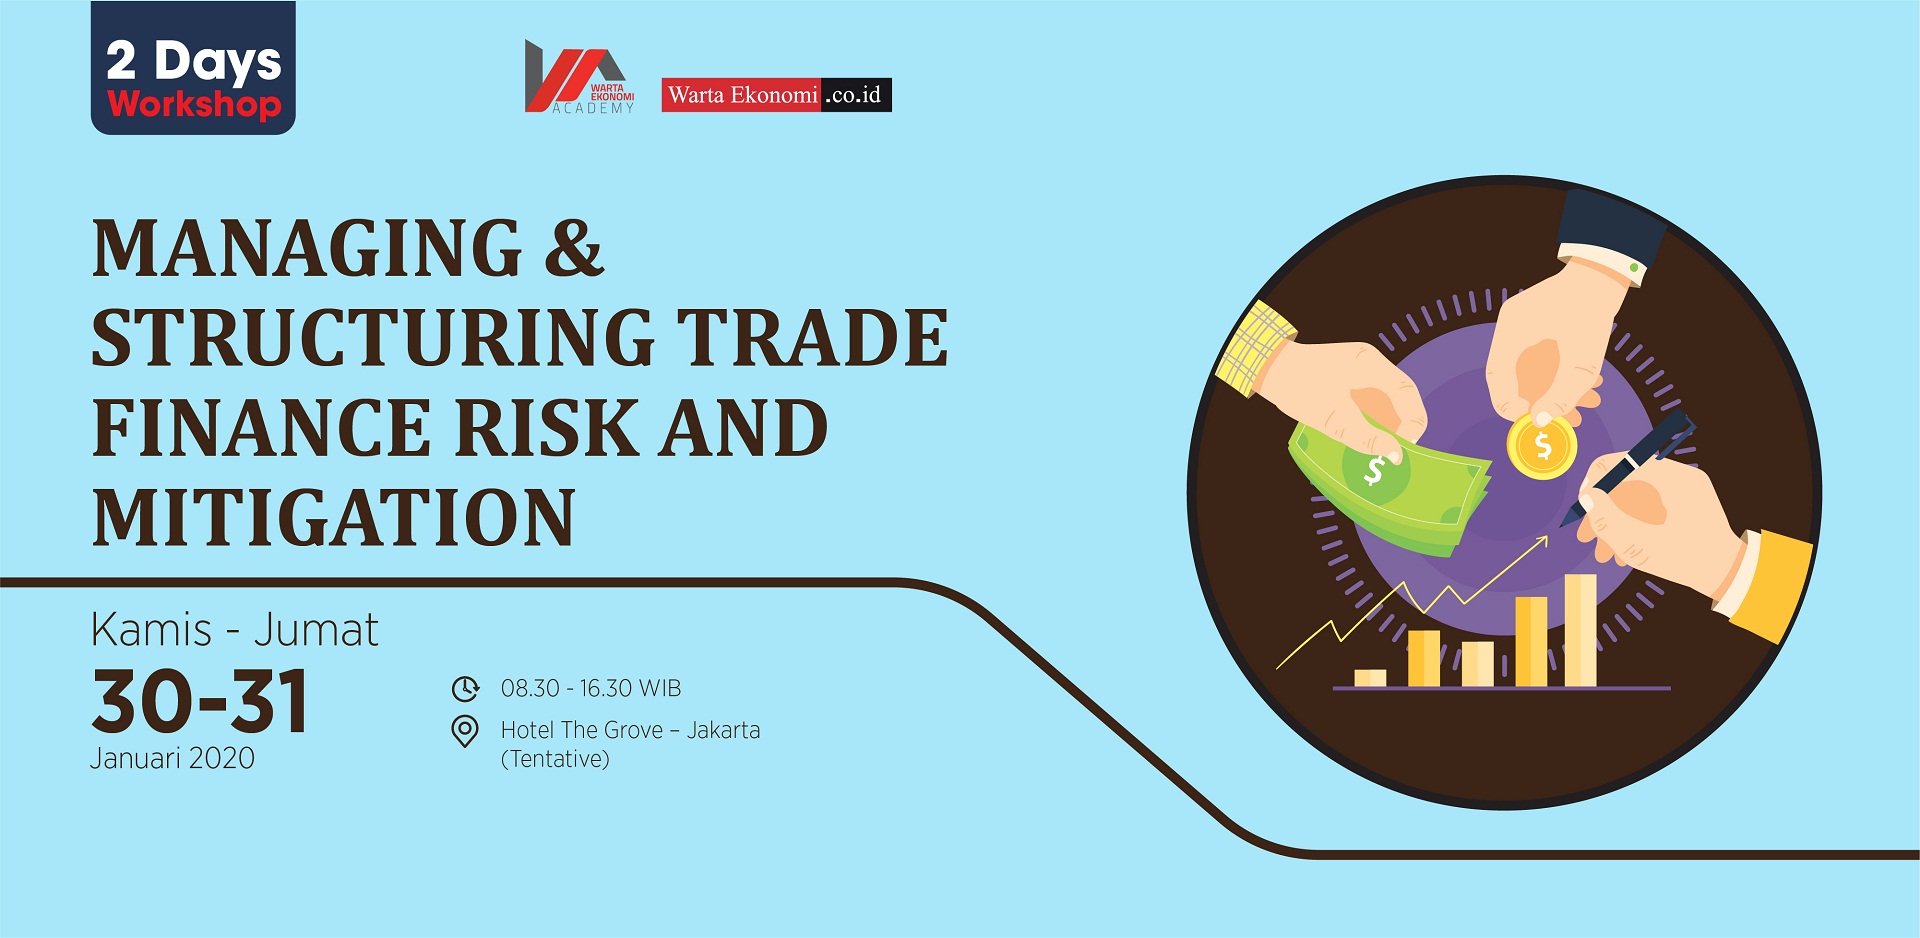 Managing & Structuring Trade Finance Risk and Mitigation